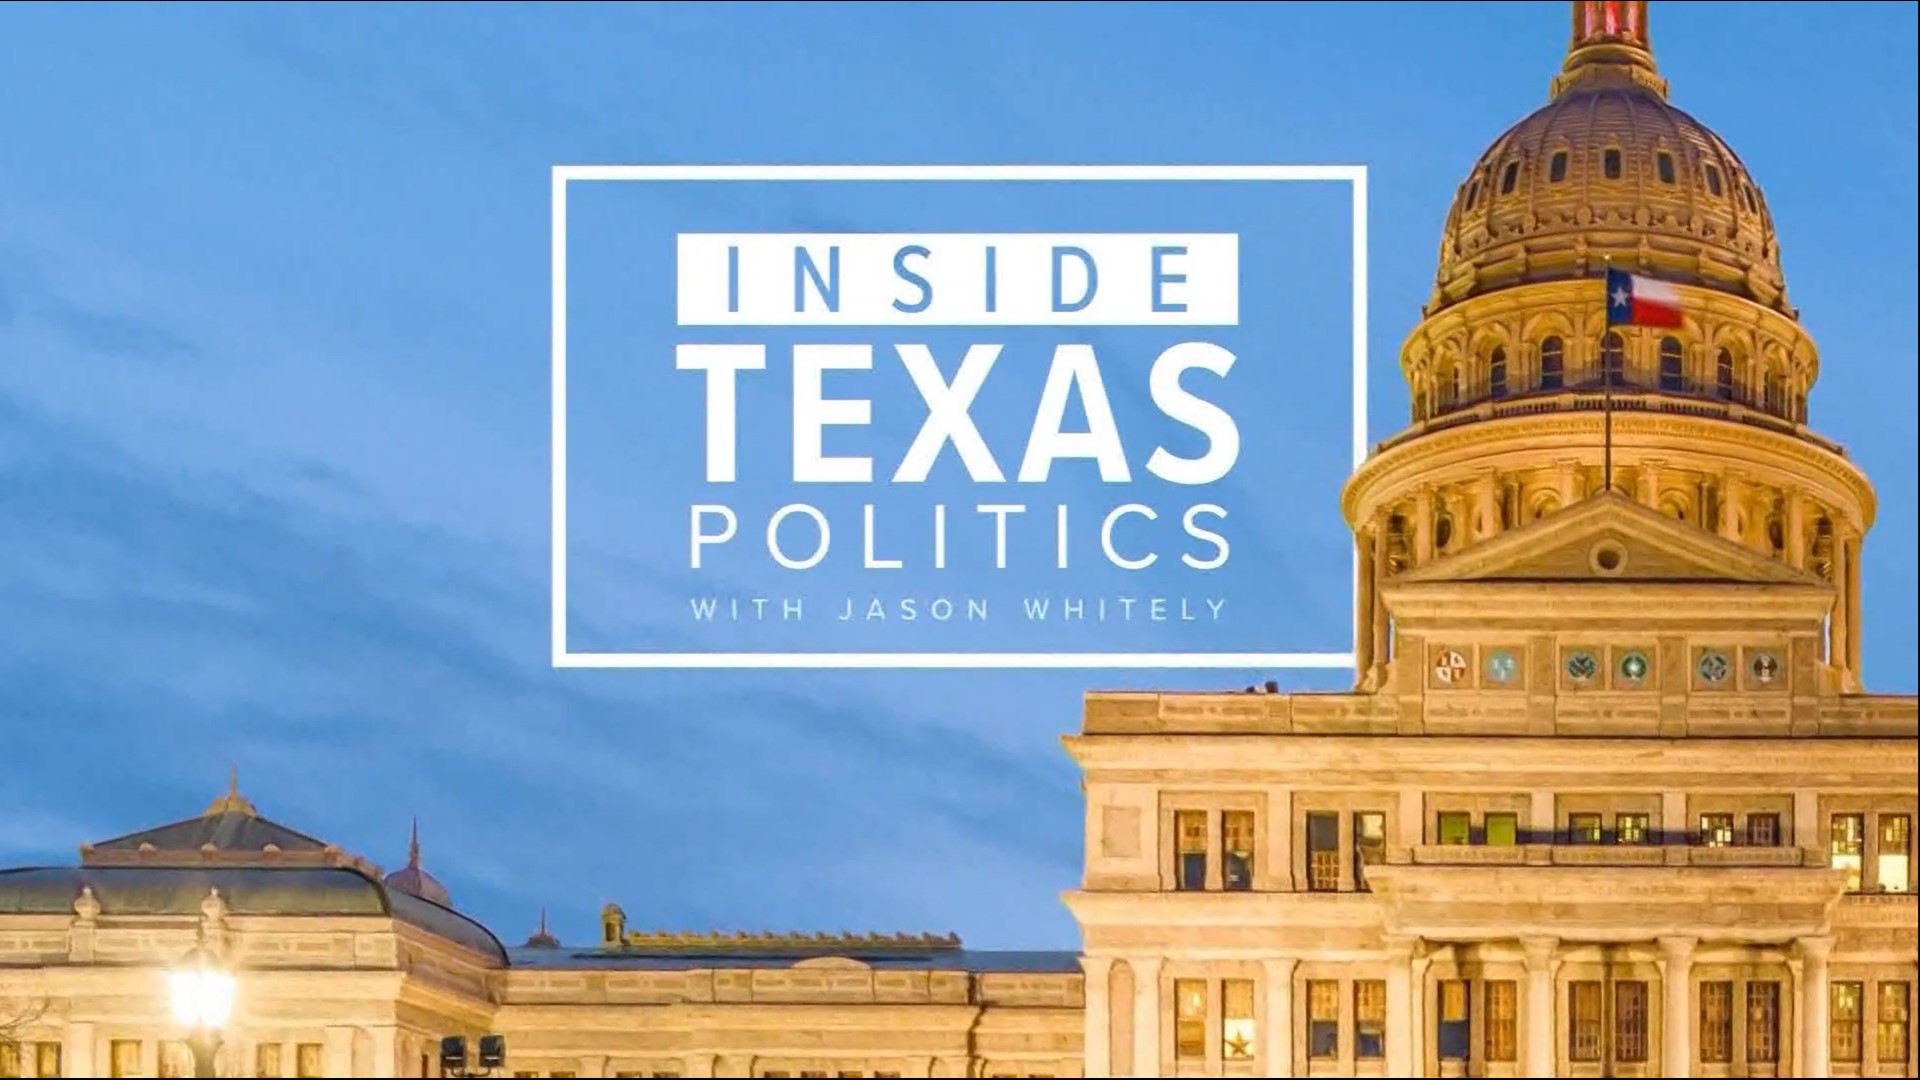 Plus: Does Tarrant County's search for a new elections administration need federal oversight? And how much will school choice cost Texas districts per student?